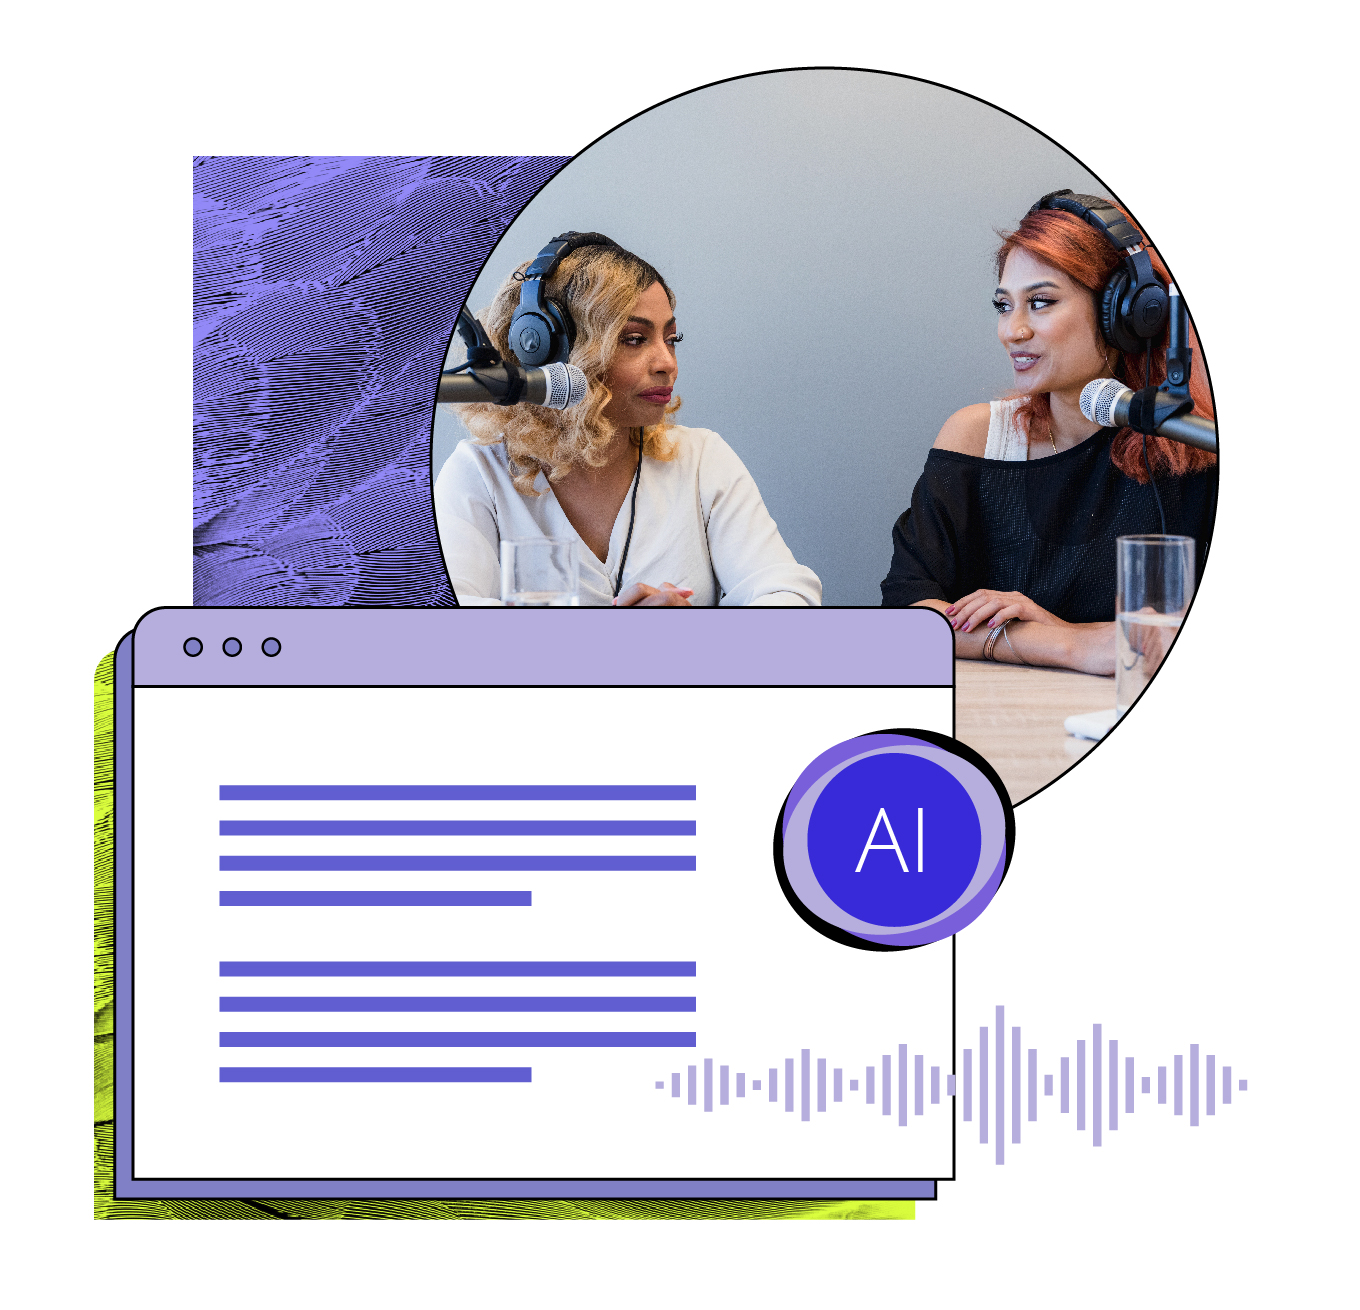 Video User Interface of a Podcast Host speaking to a guest with Rev's auto audio transcription Services embedded.